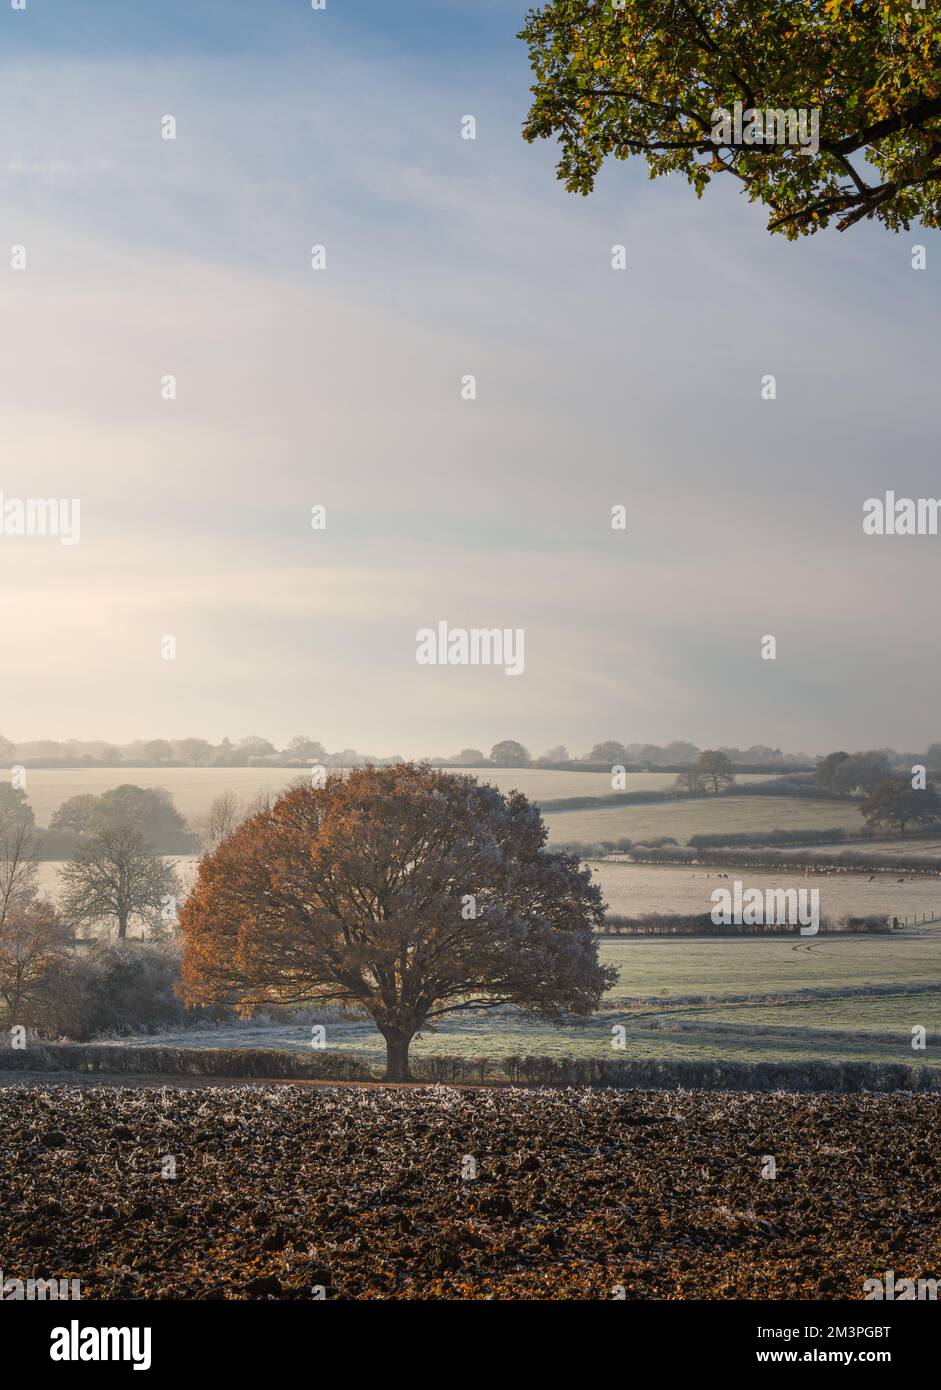 Autumn meets winter. Warm and cool tones. West Bergholt landscape, views. Essex countryside in December. Lone tree on a field. Stock Photo